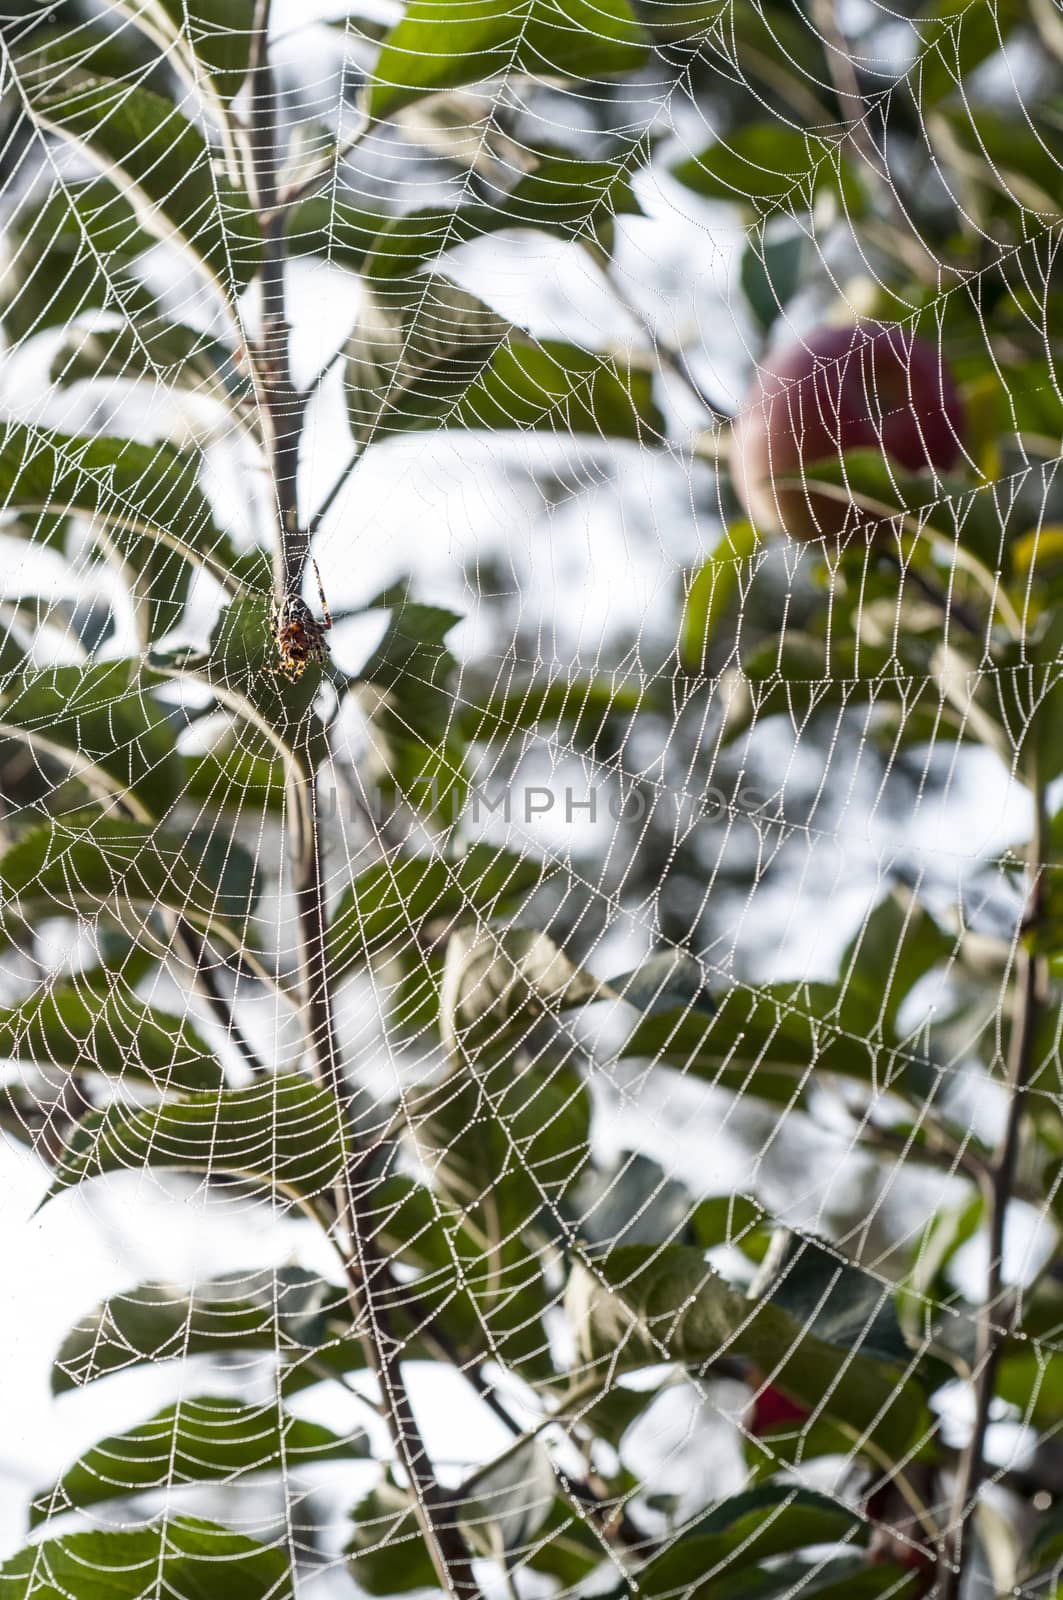 Spider hanging in center of web strung from trees with morning dew drops